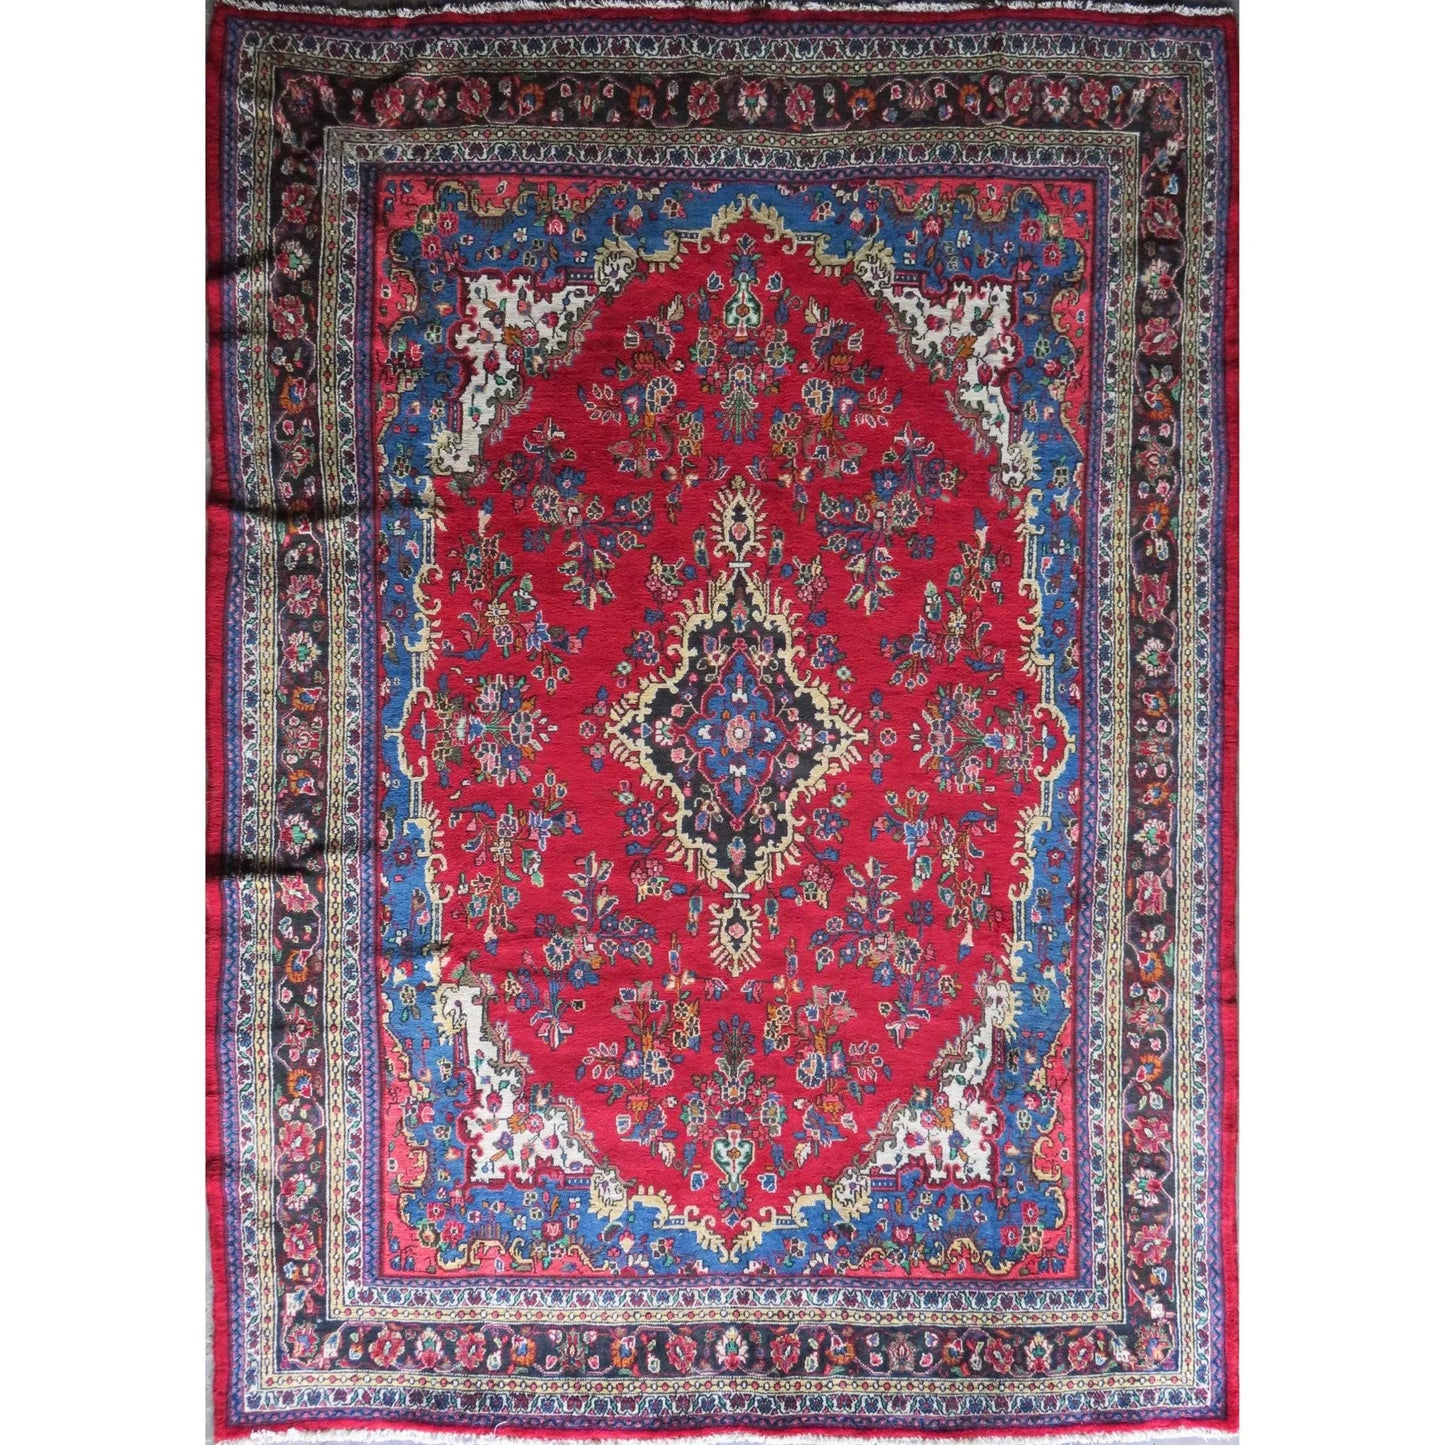 Hand-Knotted Persian Wool Rug _ Luxurious Vintage Design, 12'9" x 8'8", Artisan Crafted